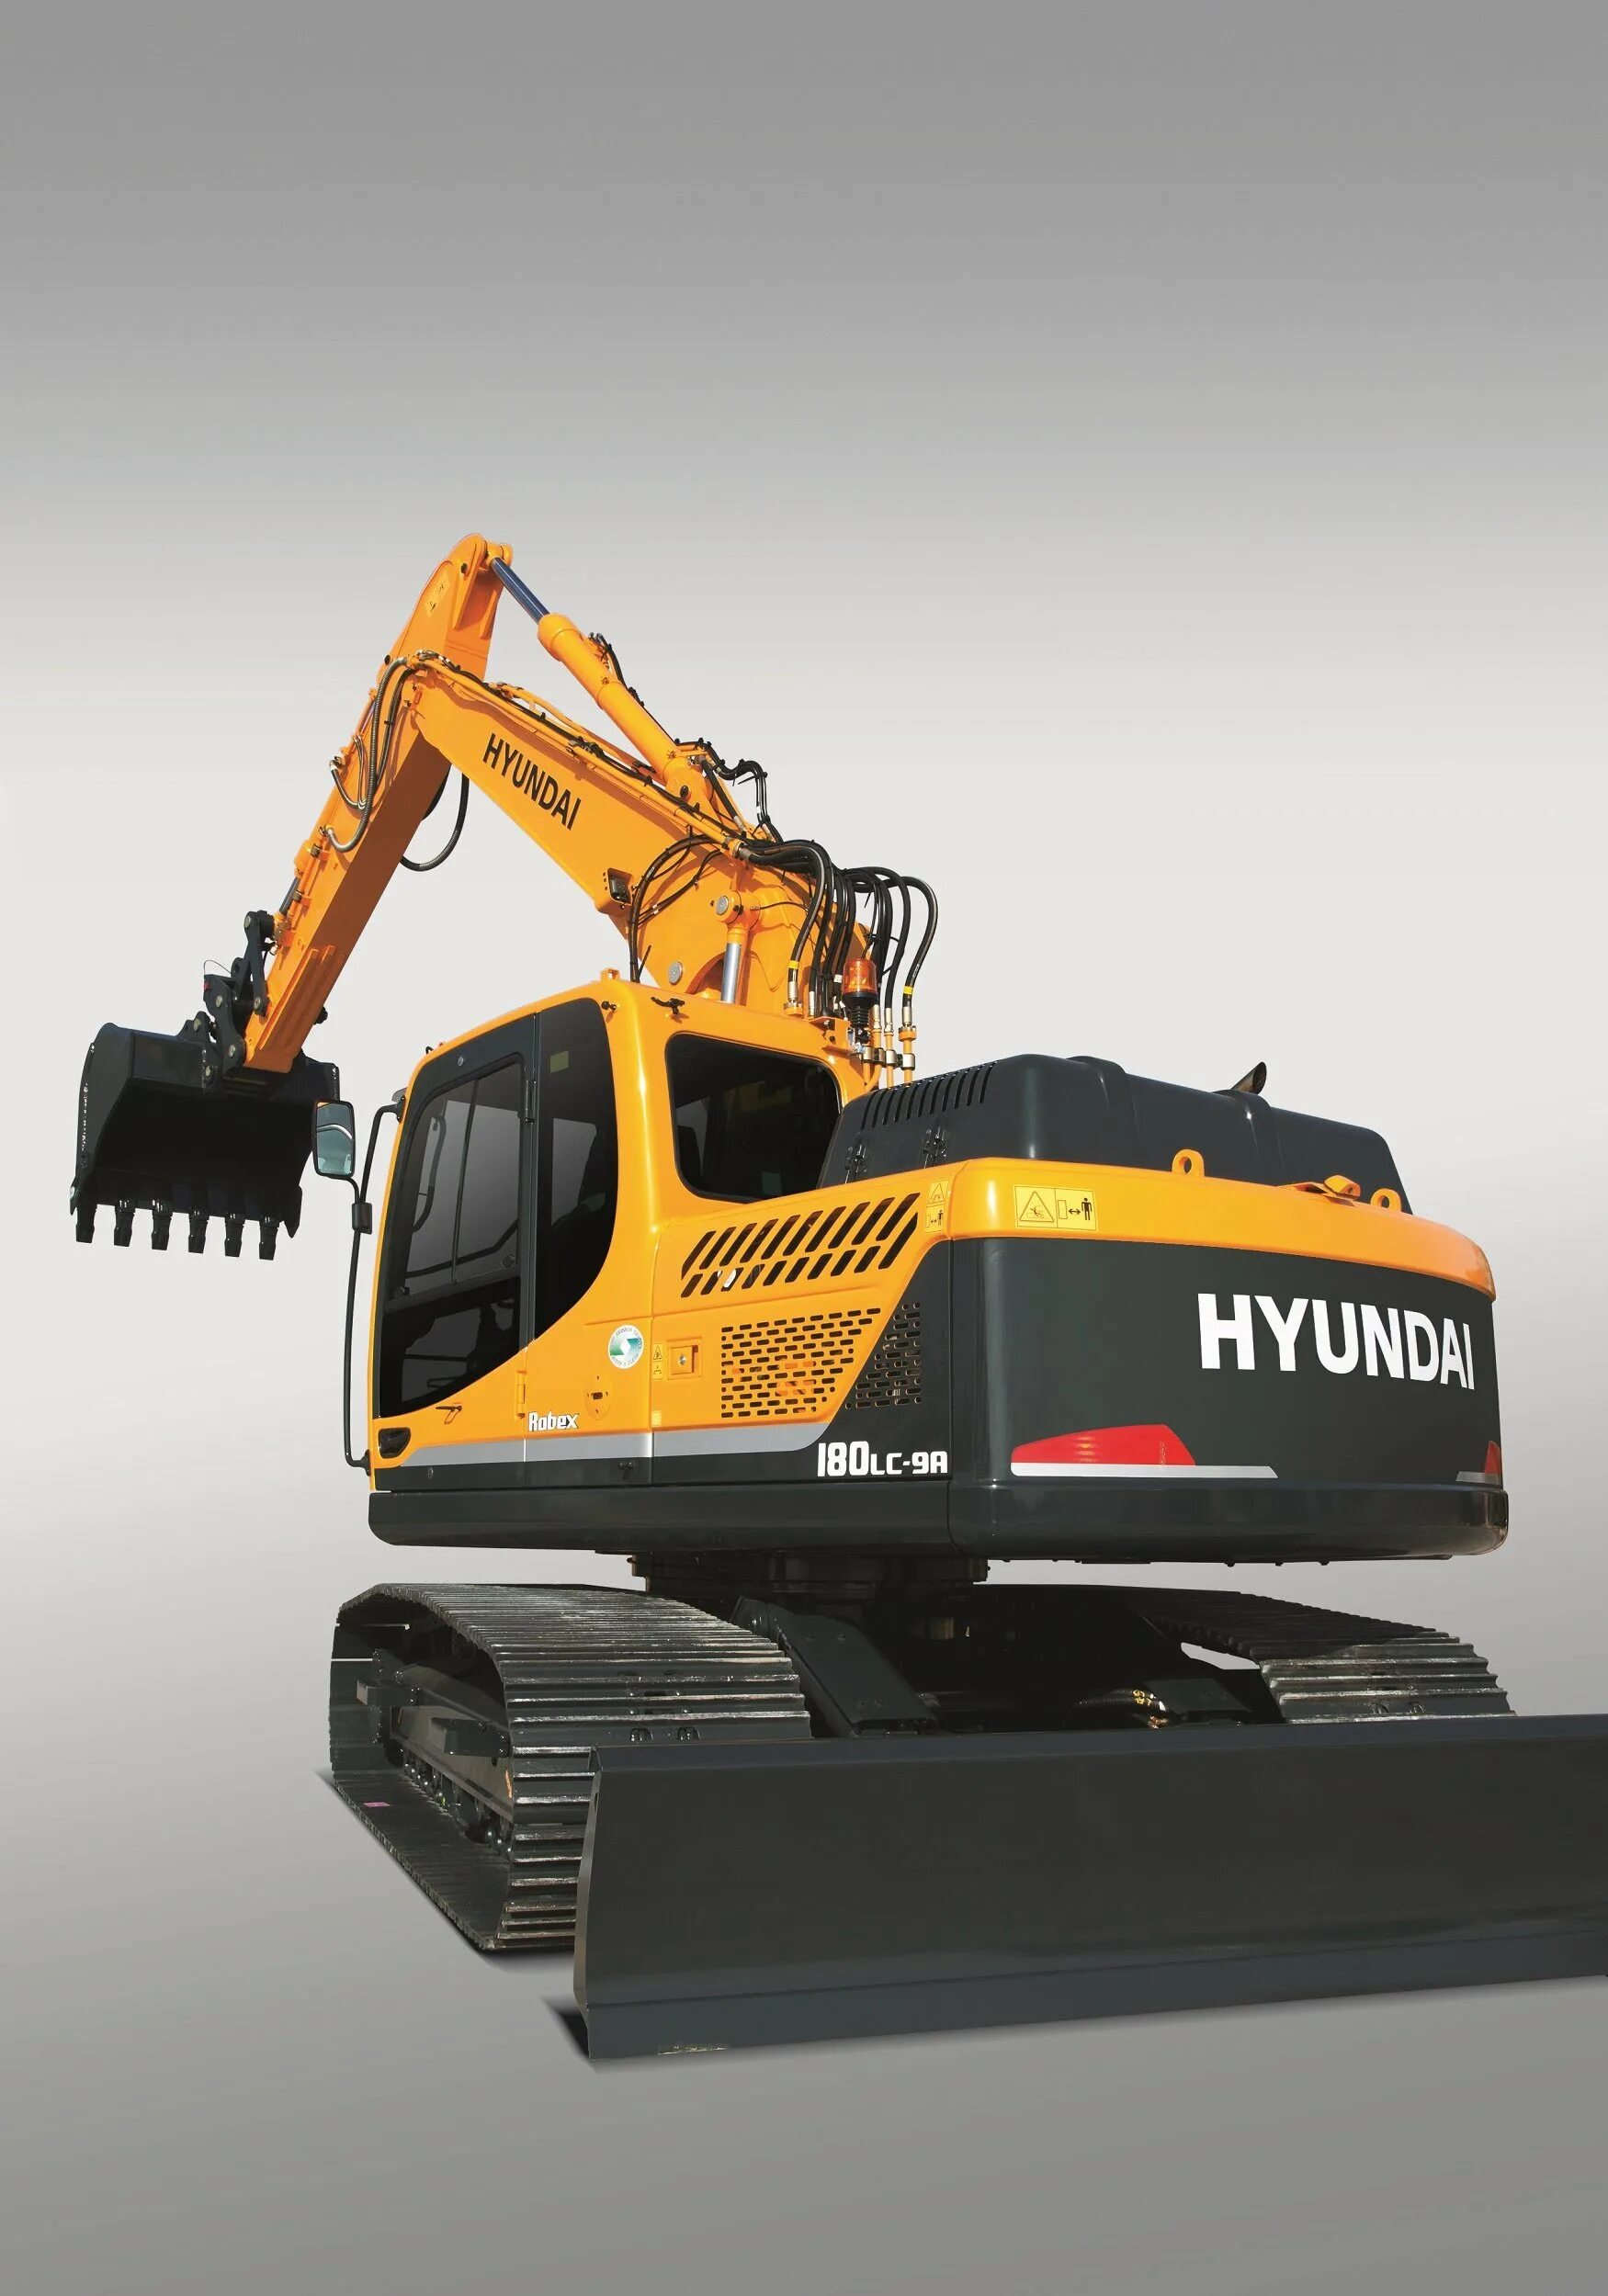 Hyundai 210w-9s. Hyundai r140w-9s. Hyundai 180w-9s. Hyundai r180lc-9.